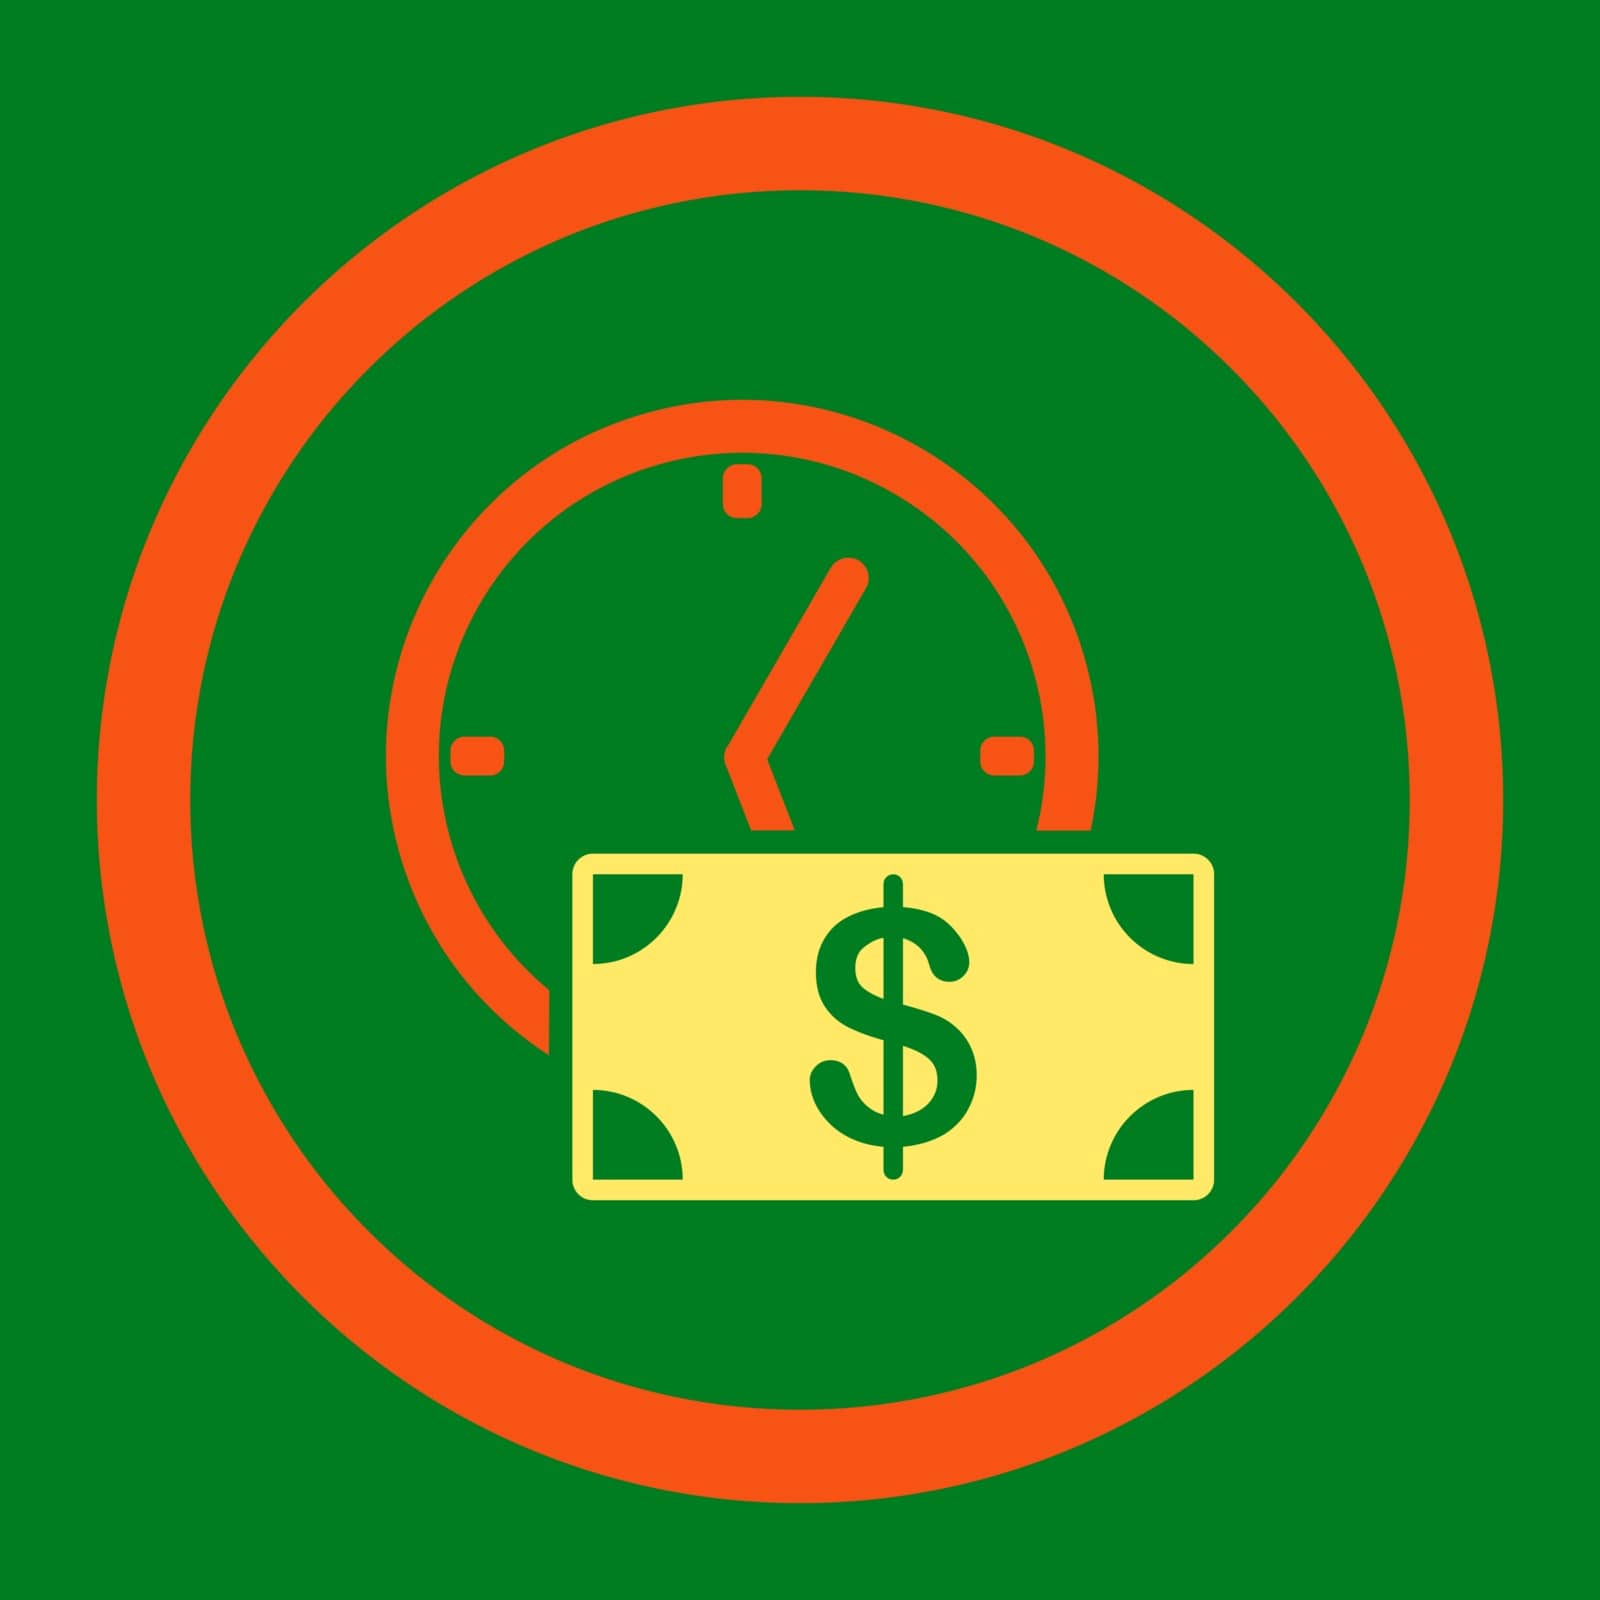 Credit vector icon. This flat rounded symbol uses orange and yellow colors and isolated on a green background.